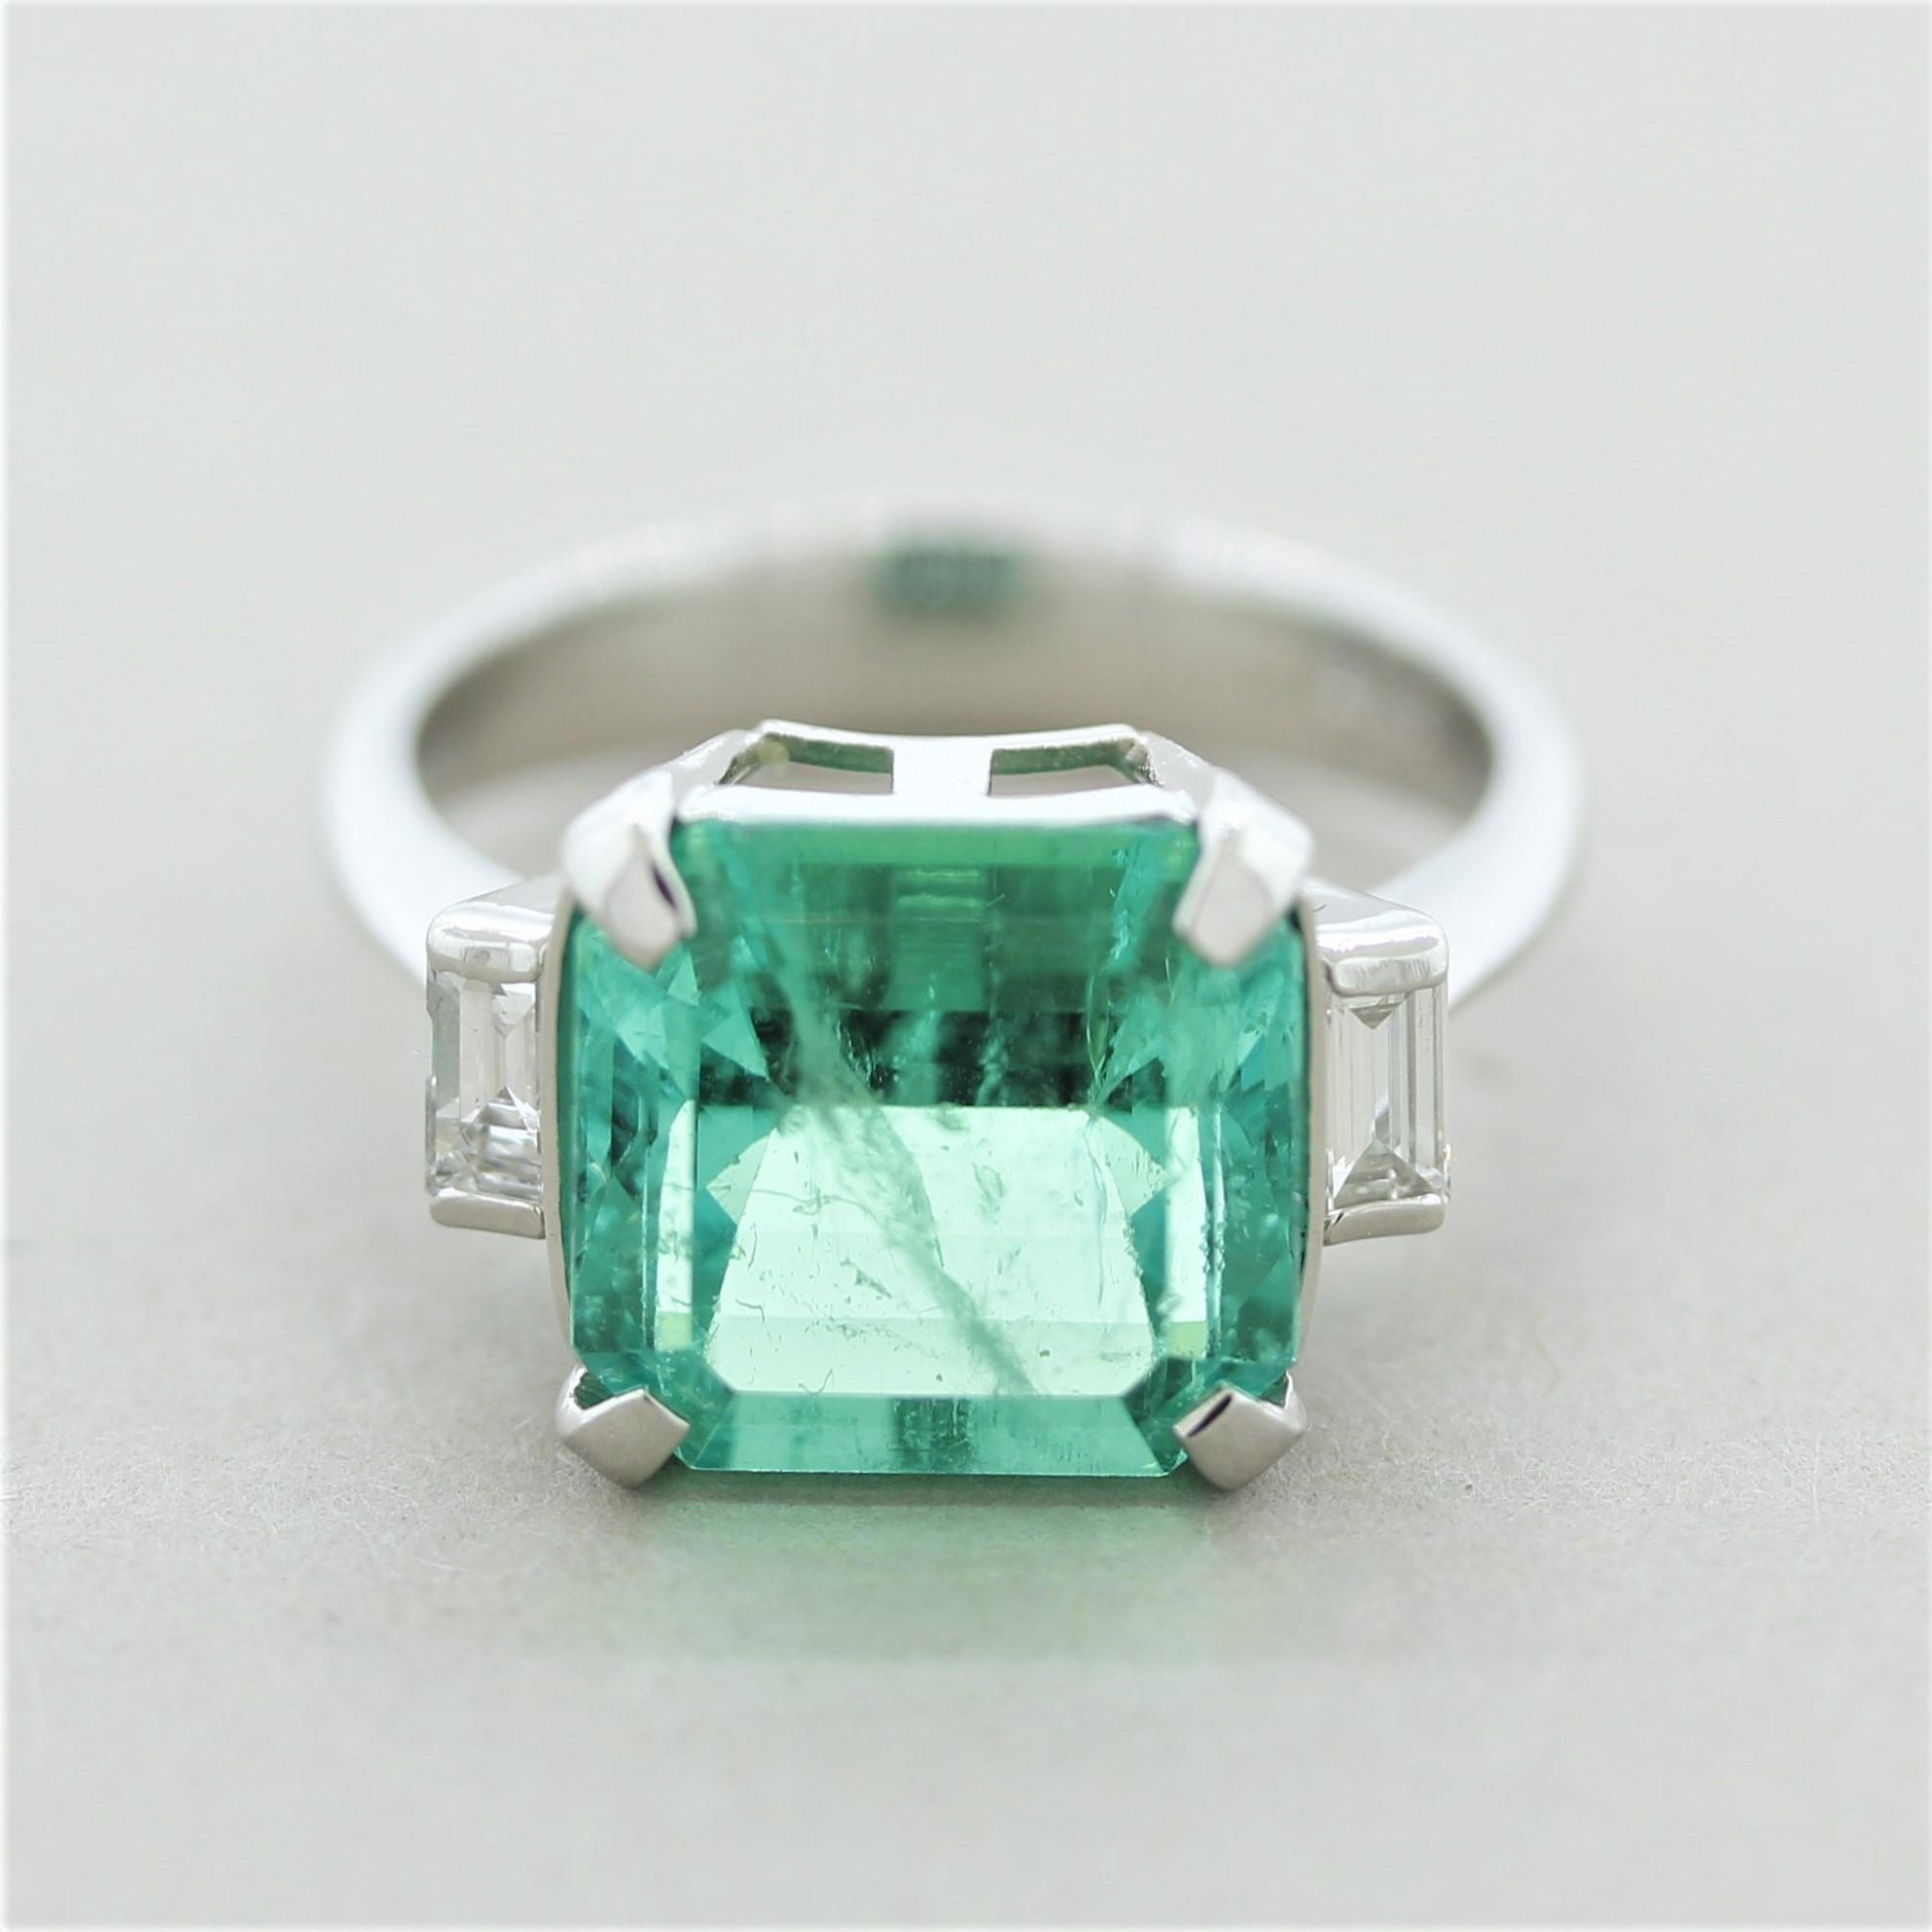 A rare and fine emerald from the famed mines in Colombia weighing 5.43 carats takes center stage! It has a bright and vibrant green color and is relatively free from inclusions compared to most fine gem quality emeralds. It is certified by the GIA